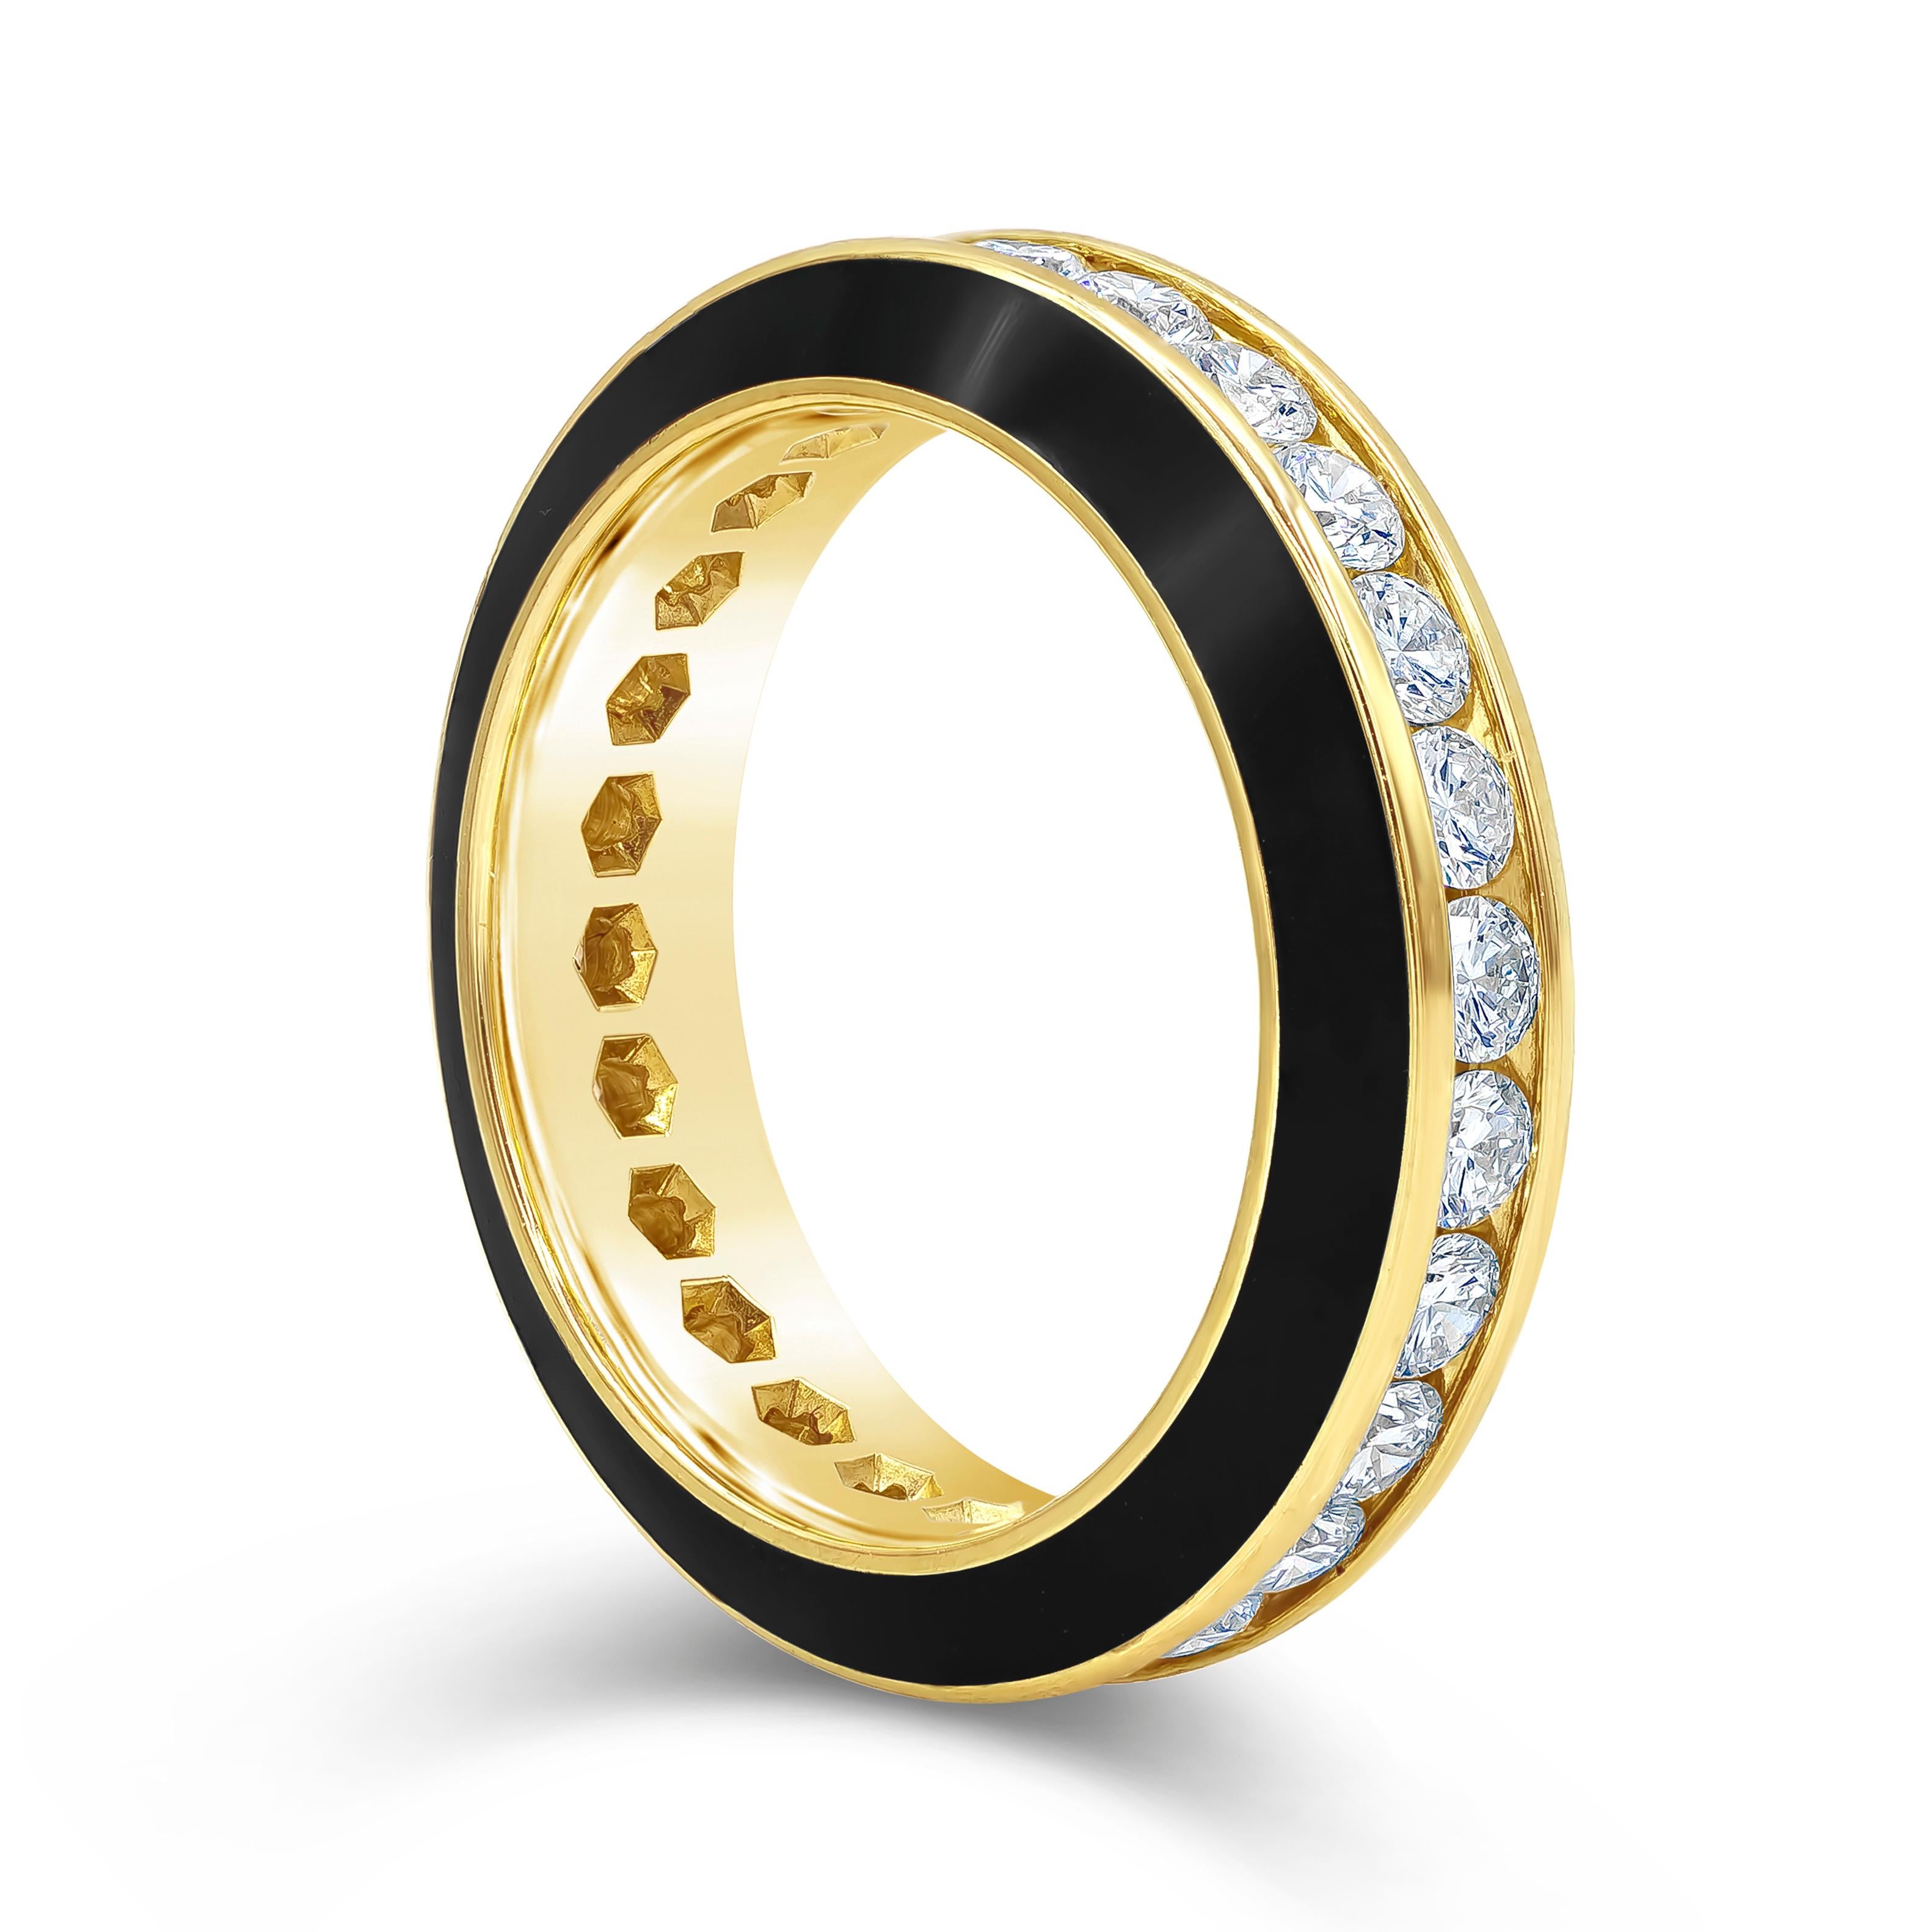 Showcasing a beautiful wedding band set with single row of round brilliant diamonds weighing 1.55 carats total, G Color and VS in Clarity. Channel set in-between two rows of black enamel, Finely made in 18K Yellow Gold. Size 6.5 US resizable upon